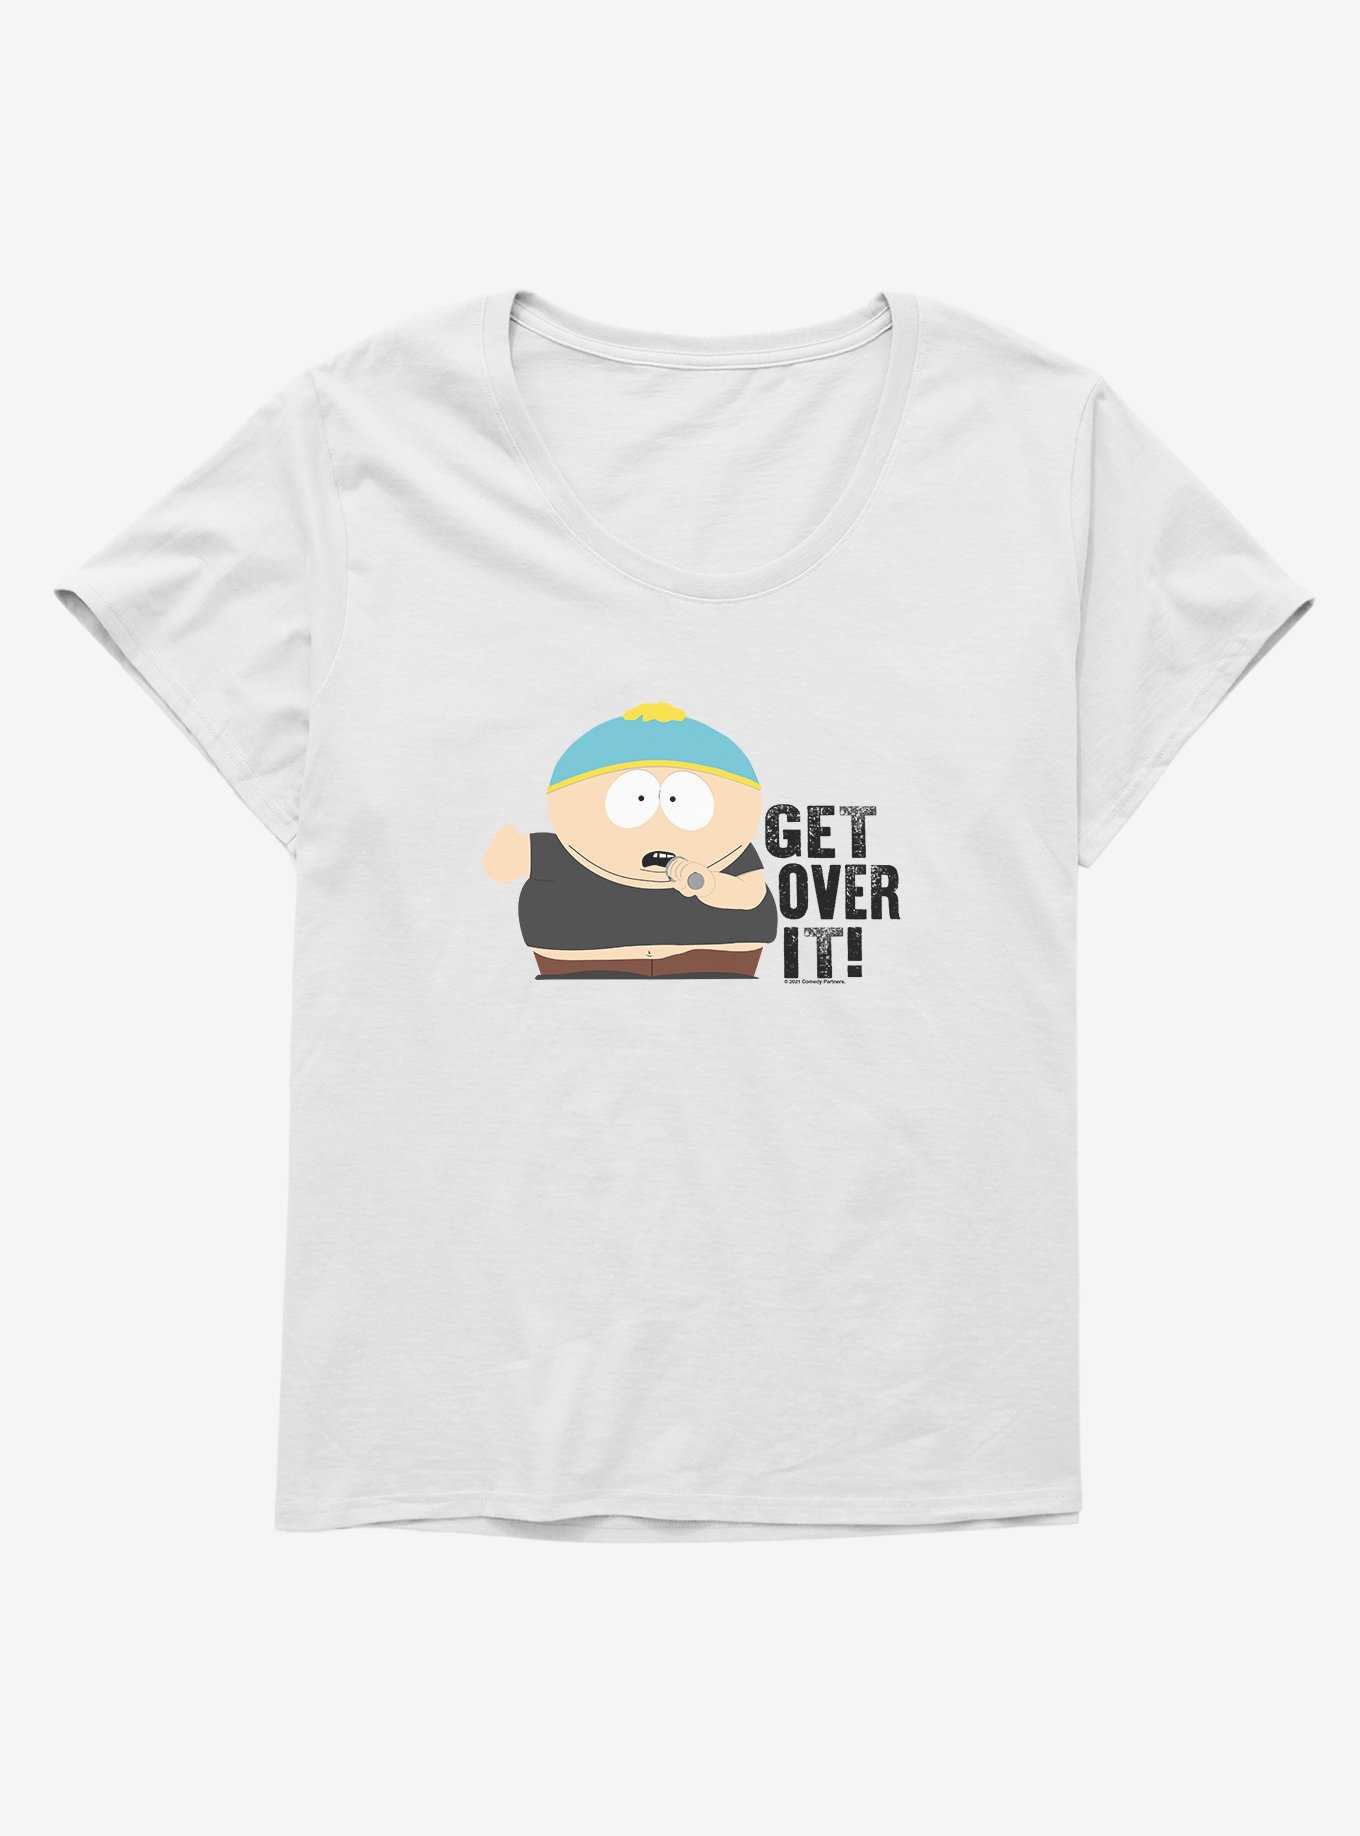 South Park Season Reference Cartman Over It Girls T-Shirt Plus Size, , hi-res